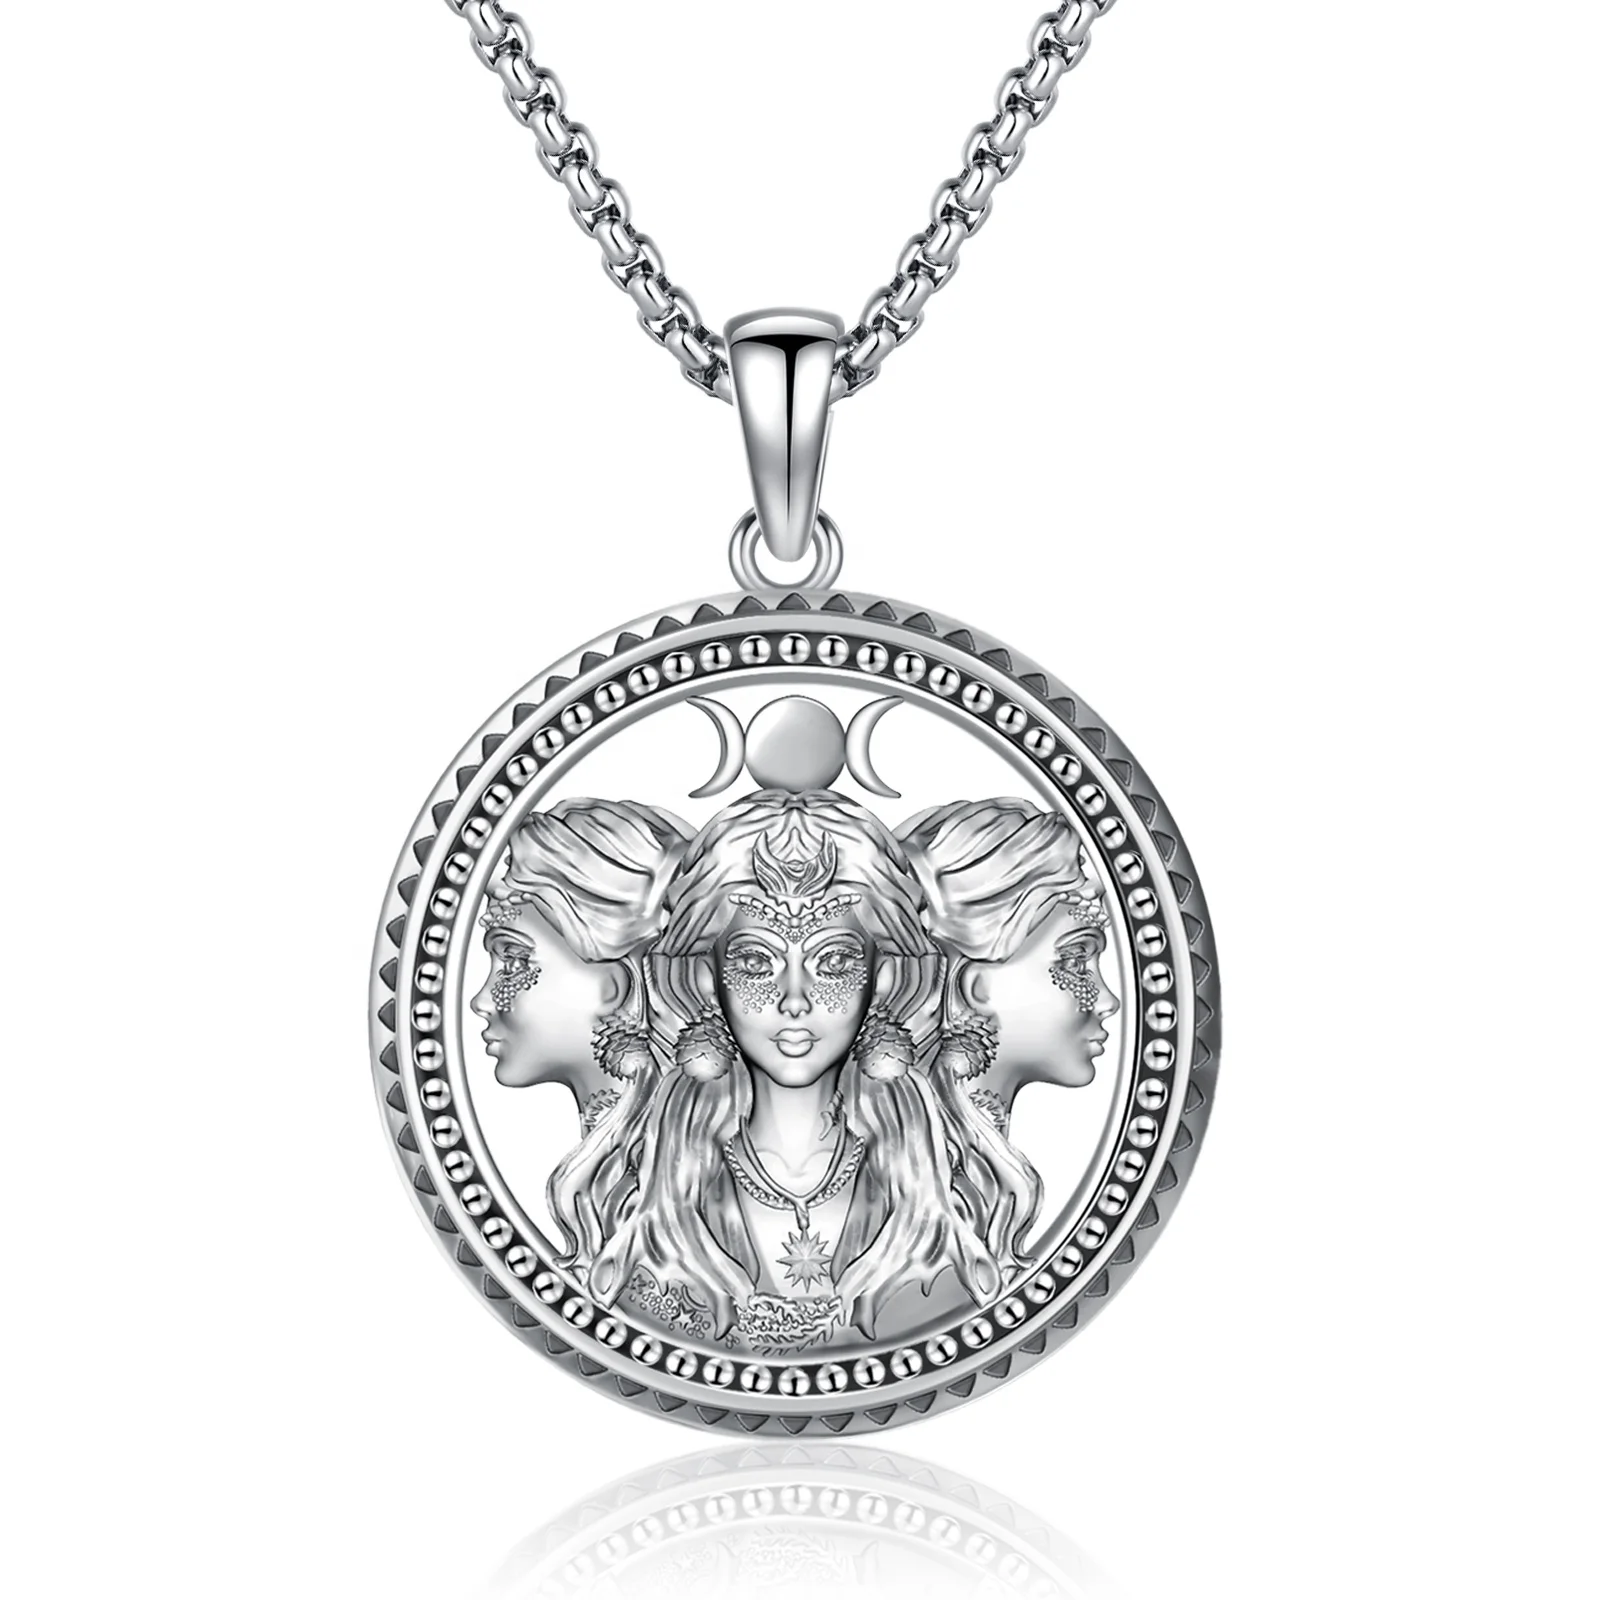 

Fine Jewelry 925 Sterling Silver Vintage Design Triple Moon Goddess Amulet Charms Pendant Necklace for Women or Men